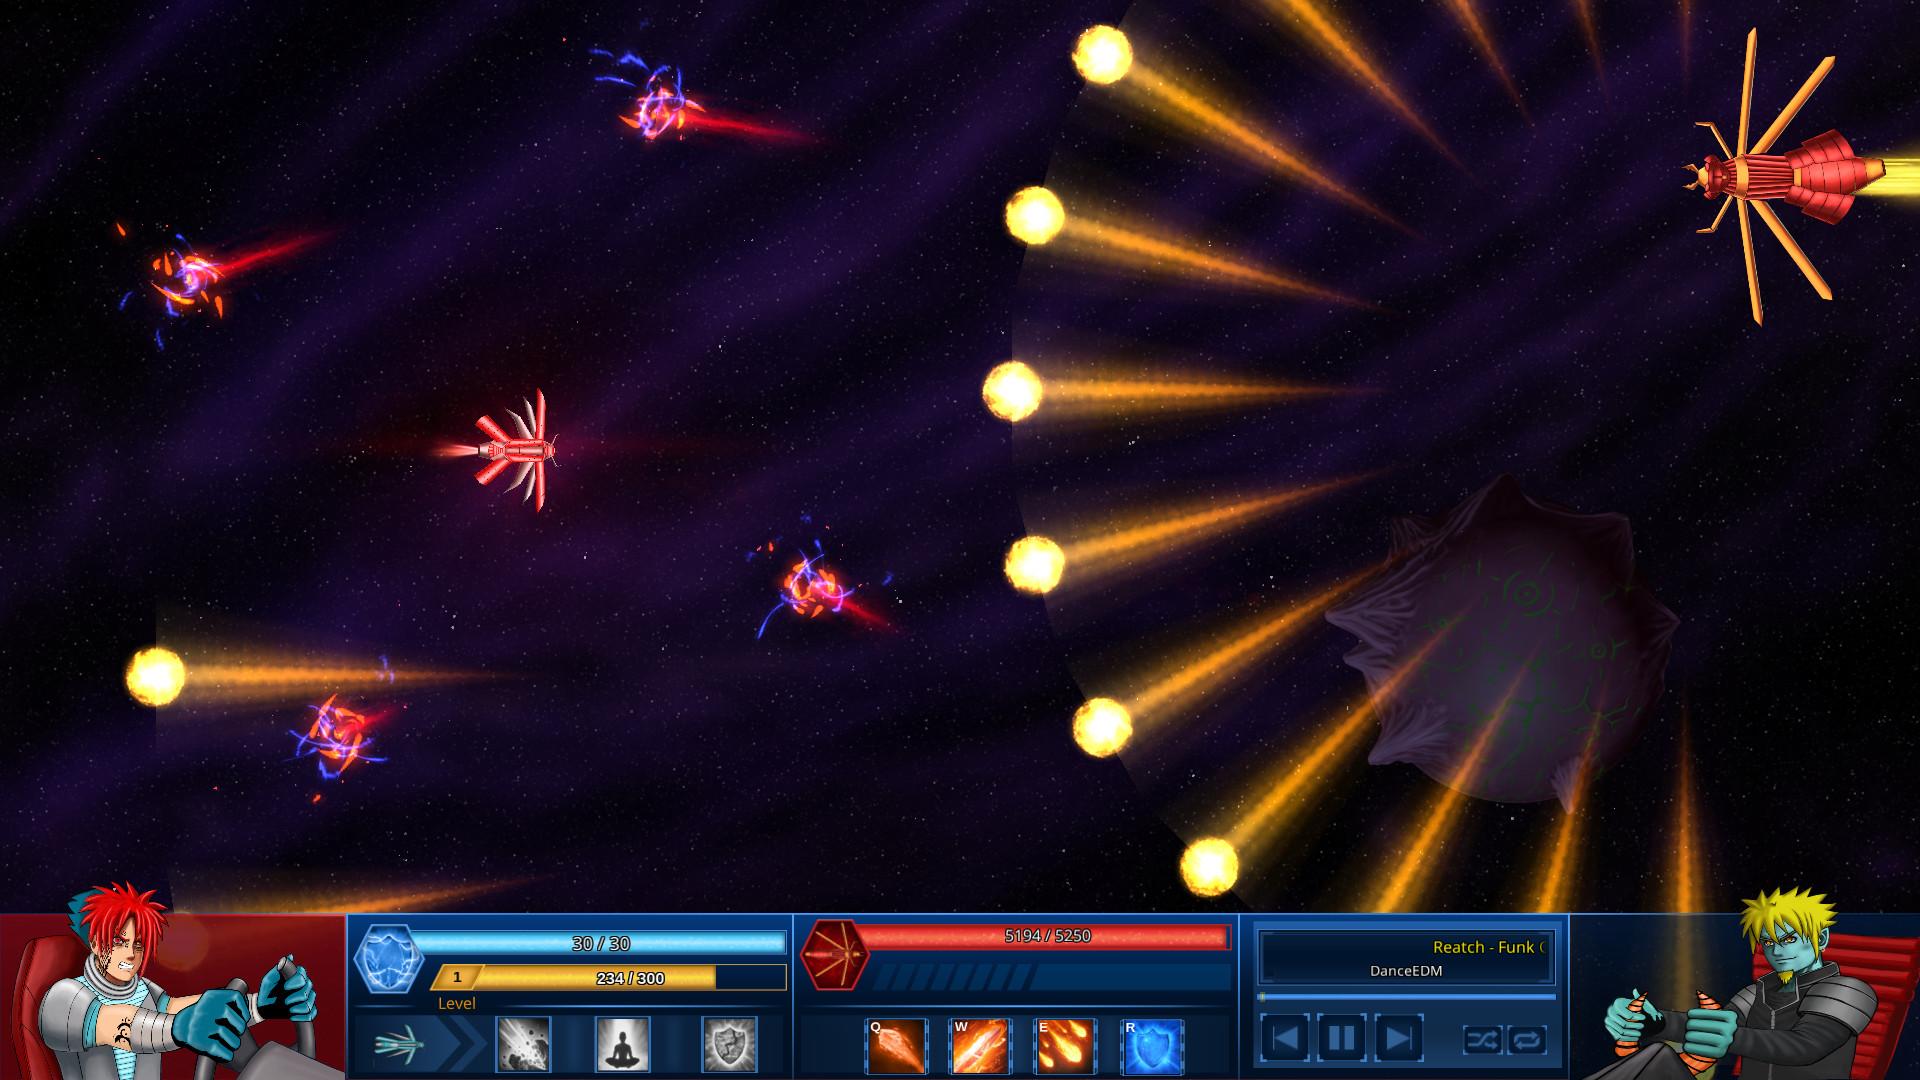 Screenshot №13 from game Survive in Space